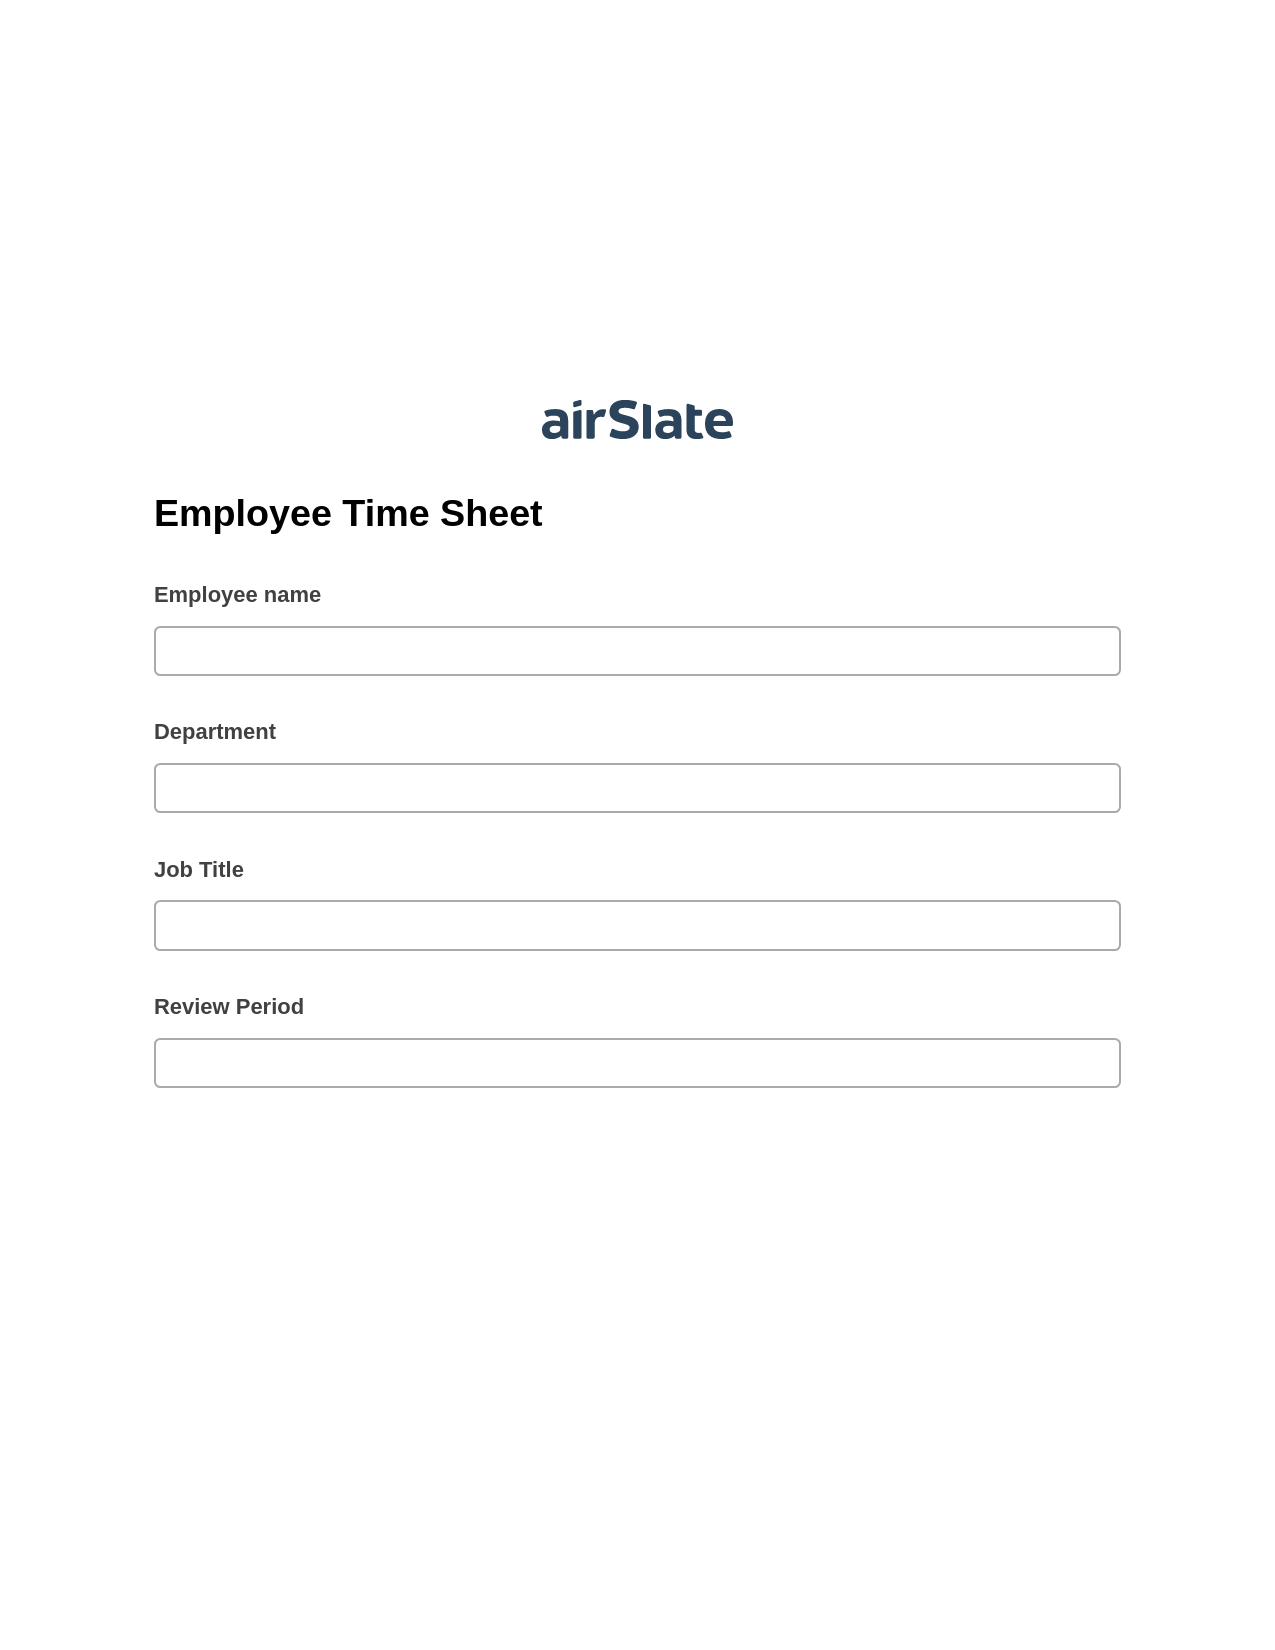 Multirole Employee Time Sheet Pre-fill from another Slate Bot, Google Cloud Print Bot, Export to NetSuite Bot